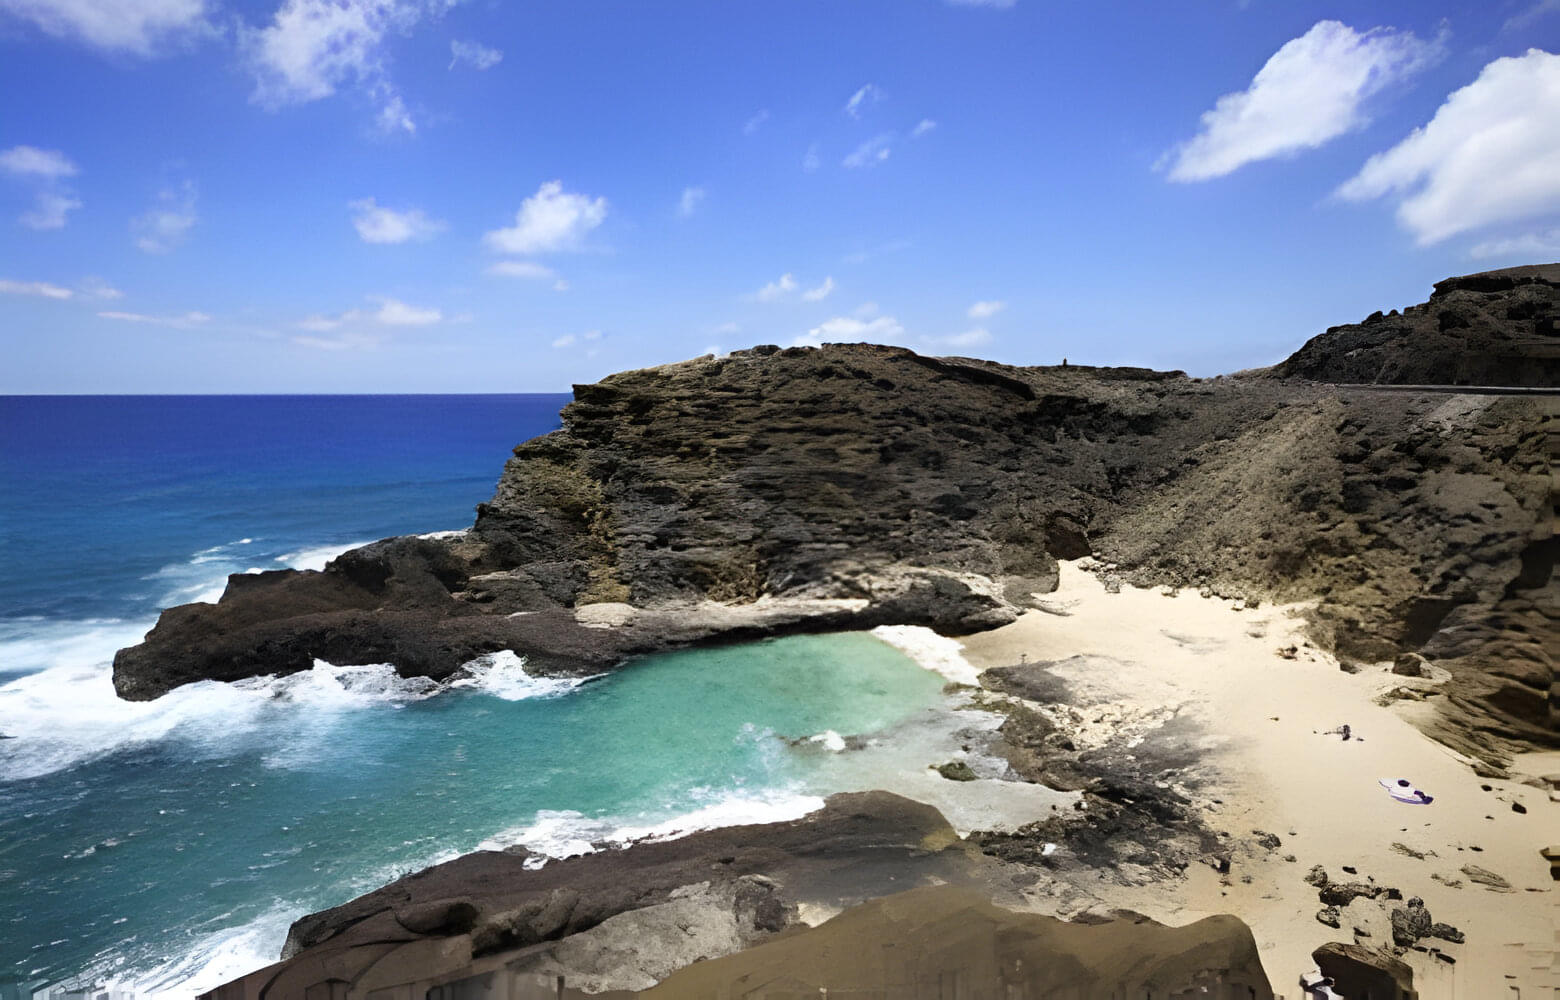 Halona Blow Hole Overview